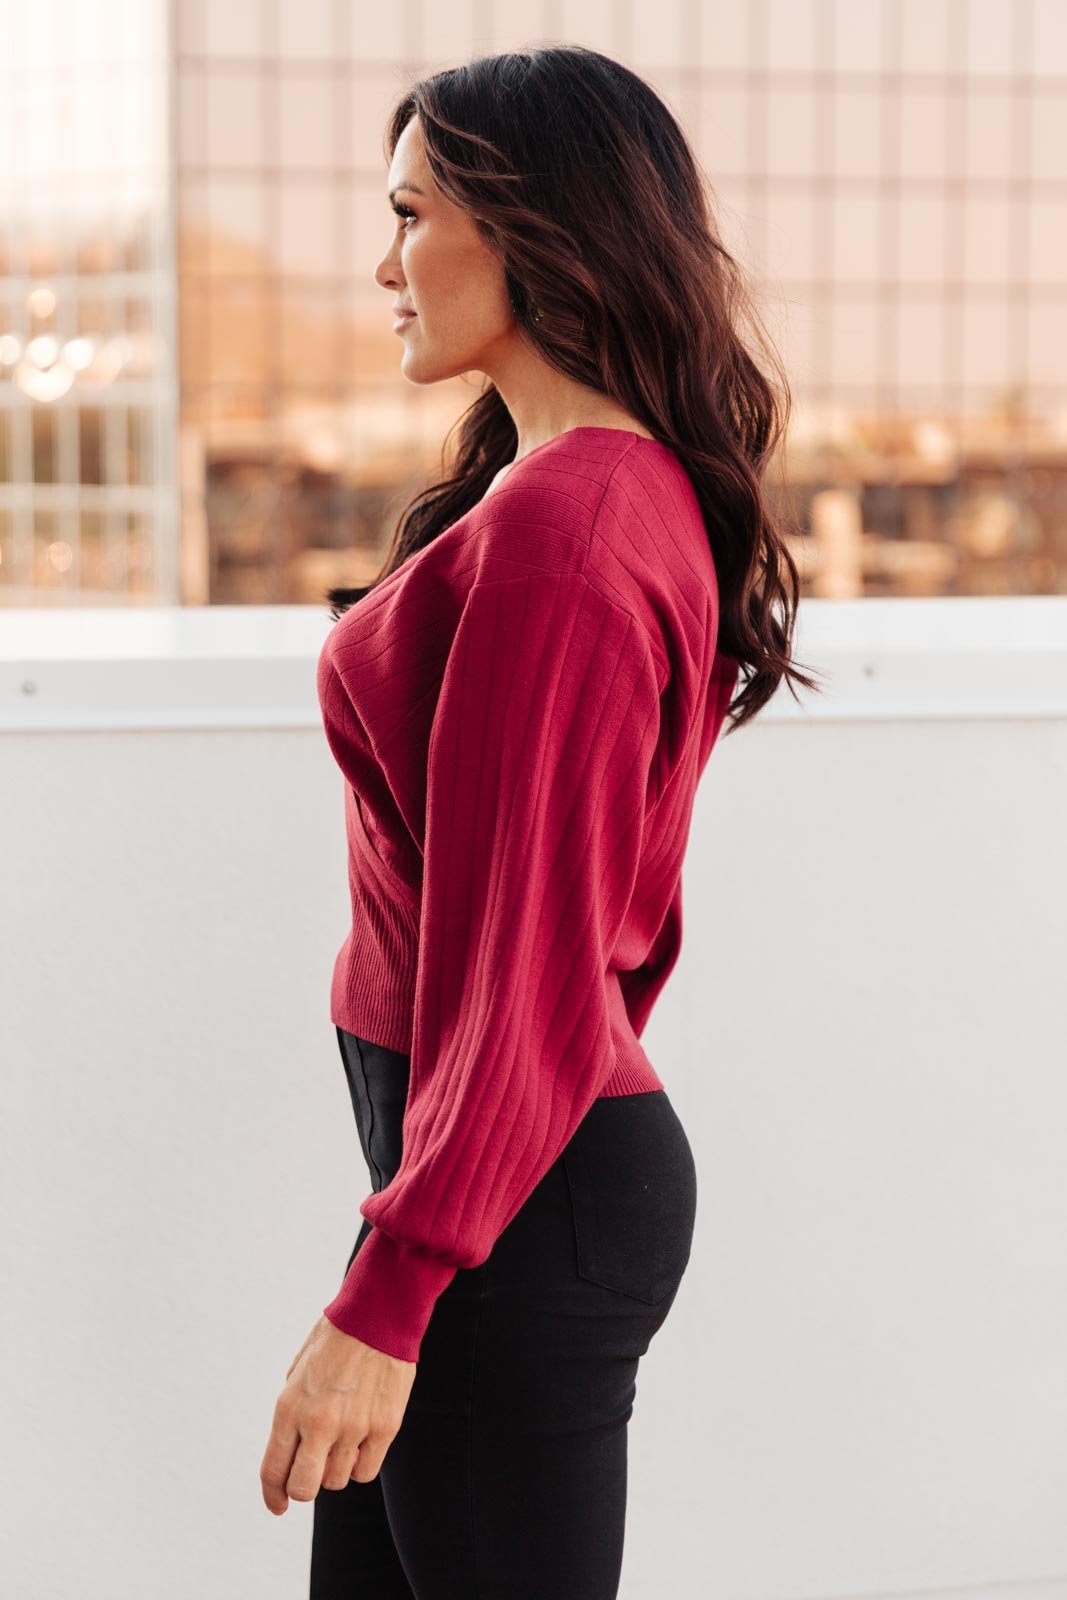 Show Stopper Sweater in Burgundy